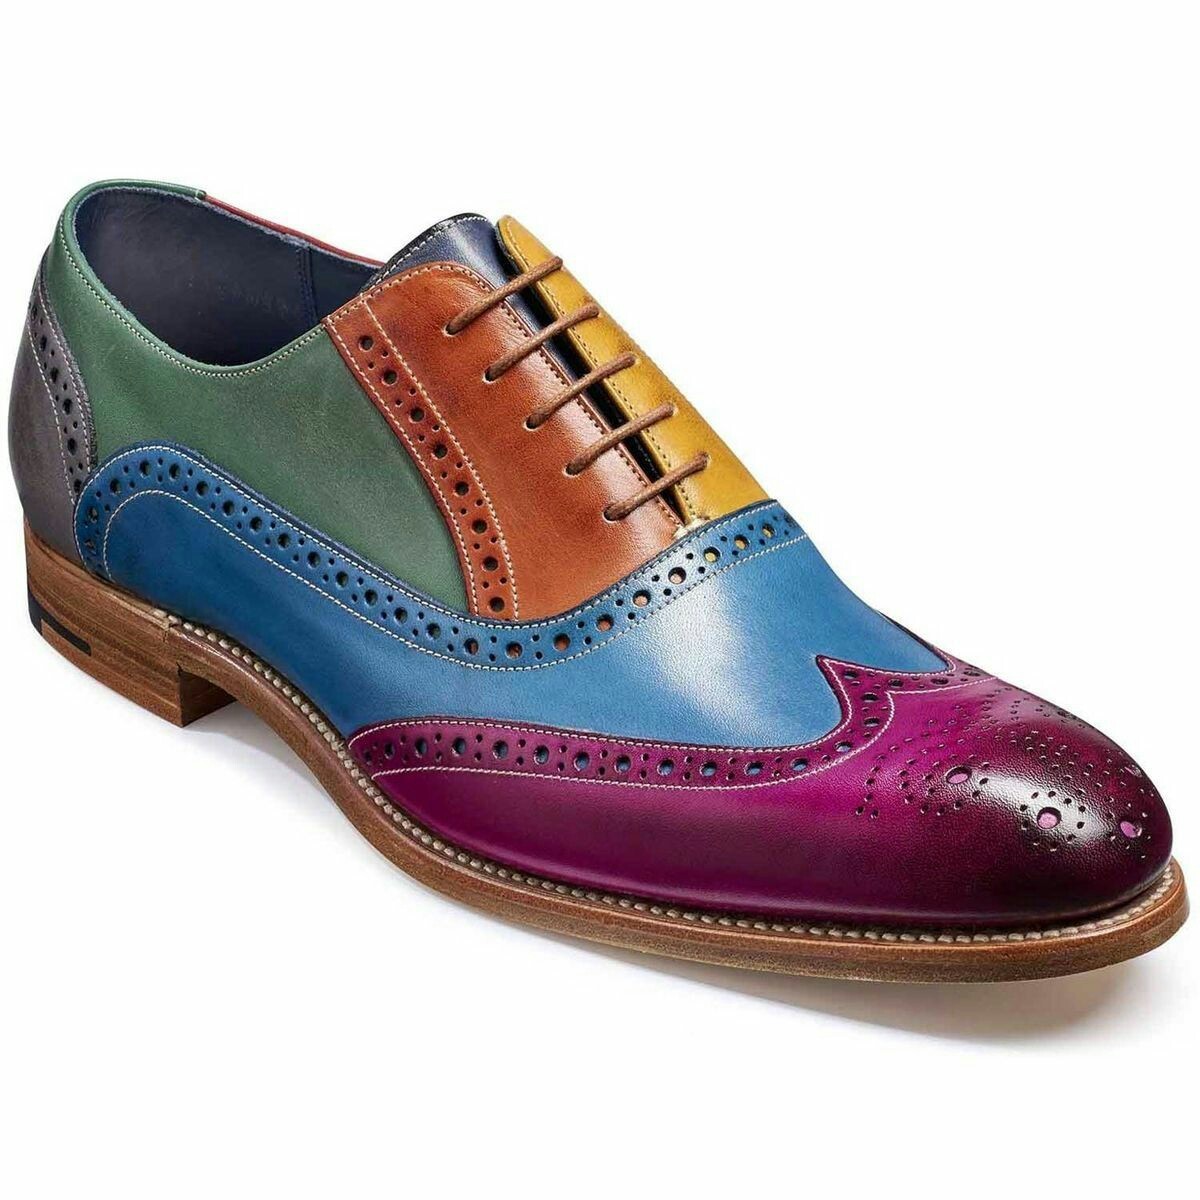 Men's Multi Color Wingtip Oxford Burnished Brogue Toe Real Leather shoes US 7-16